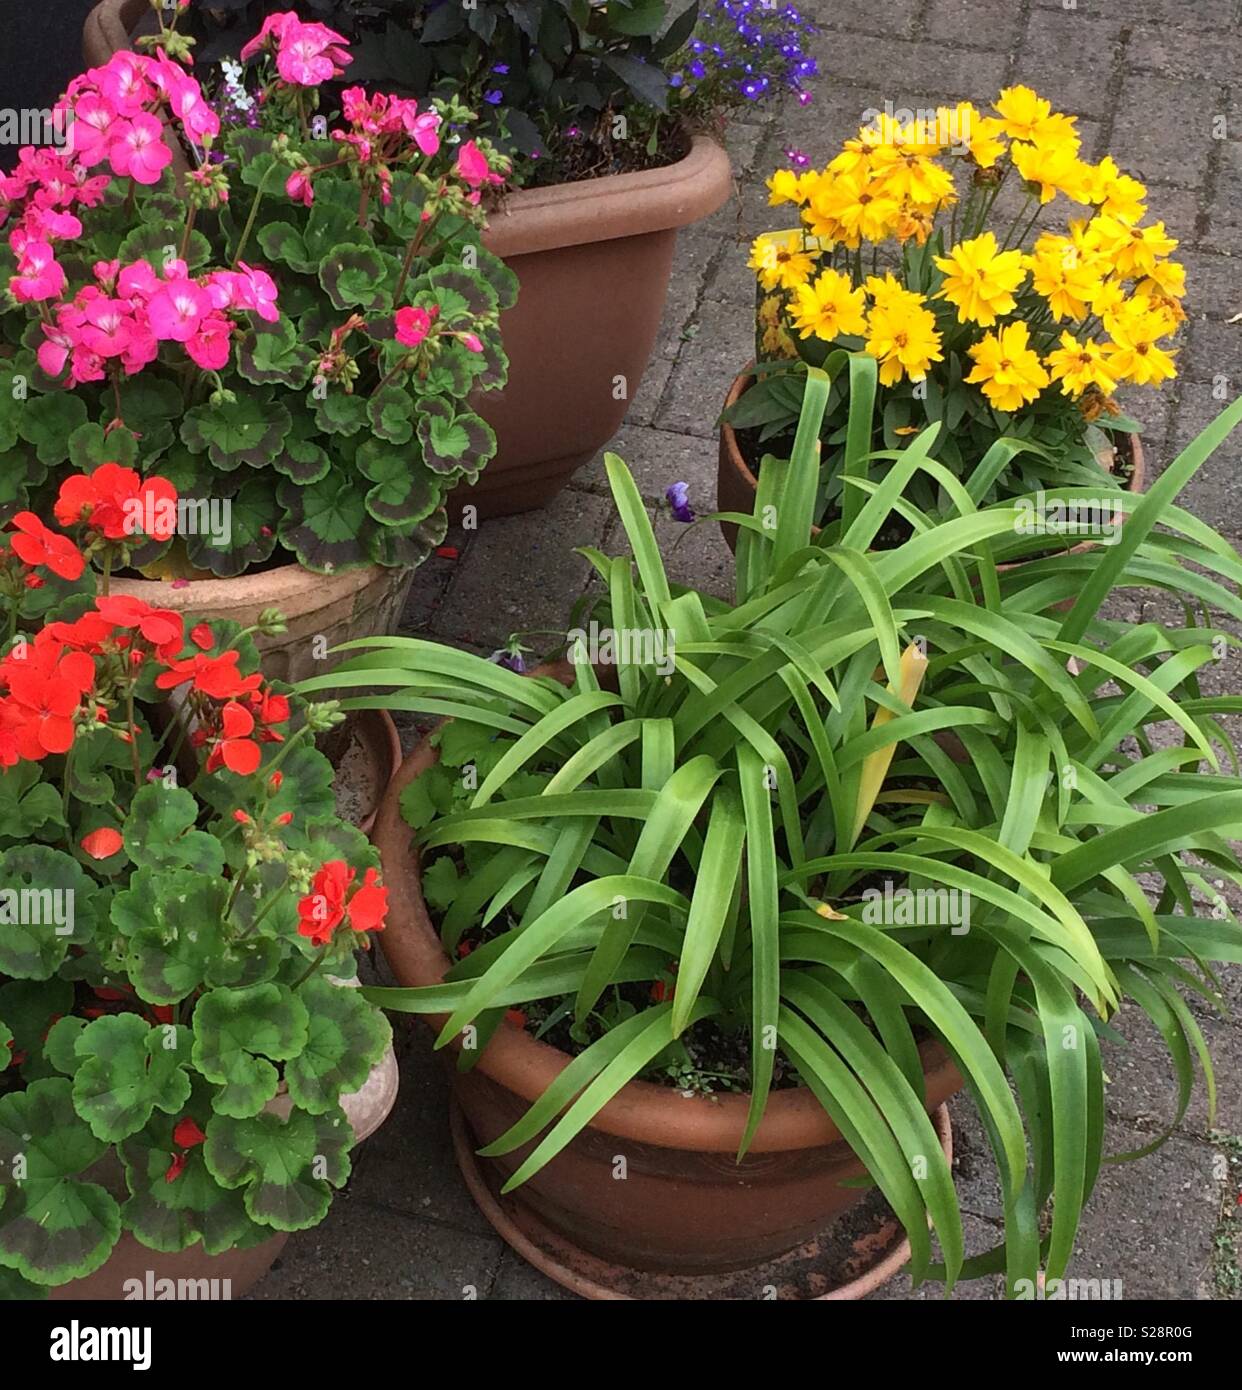 Potted garden plants Stock Photo